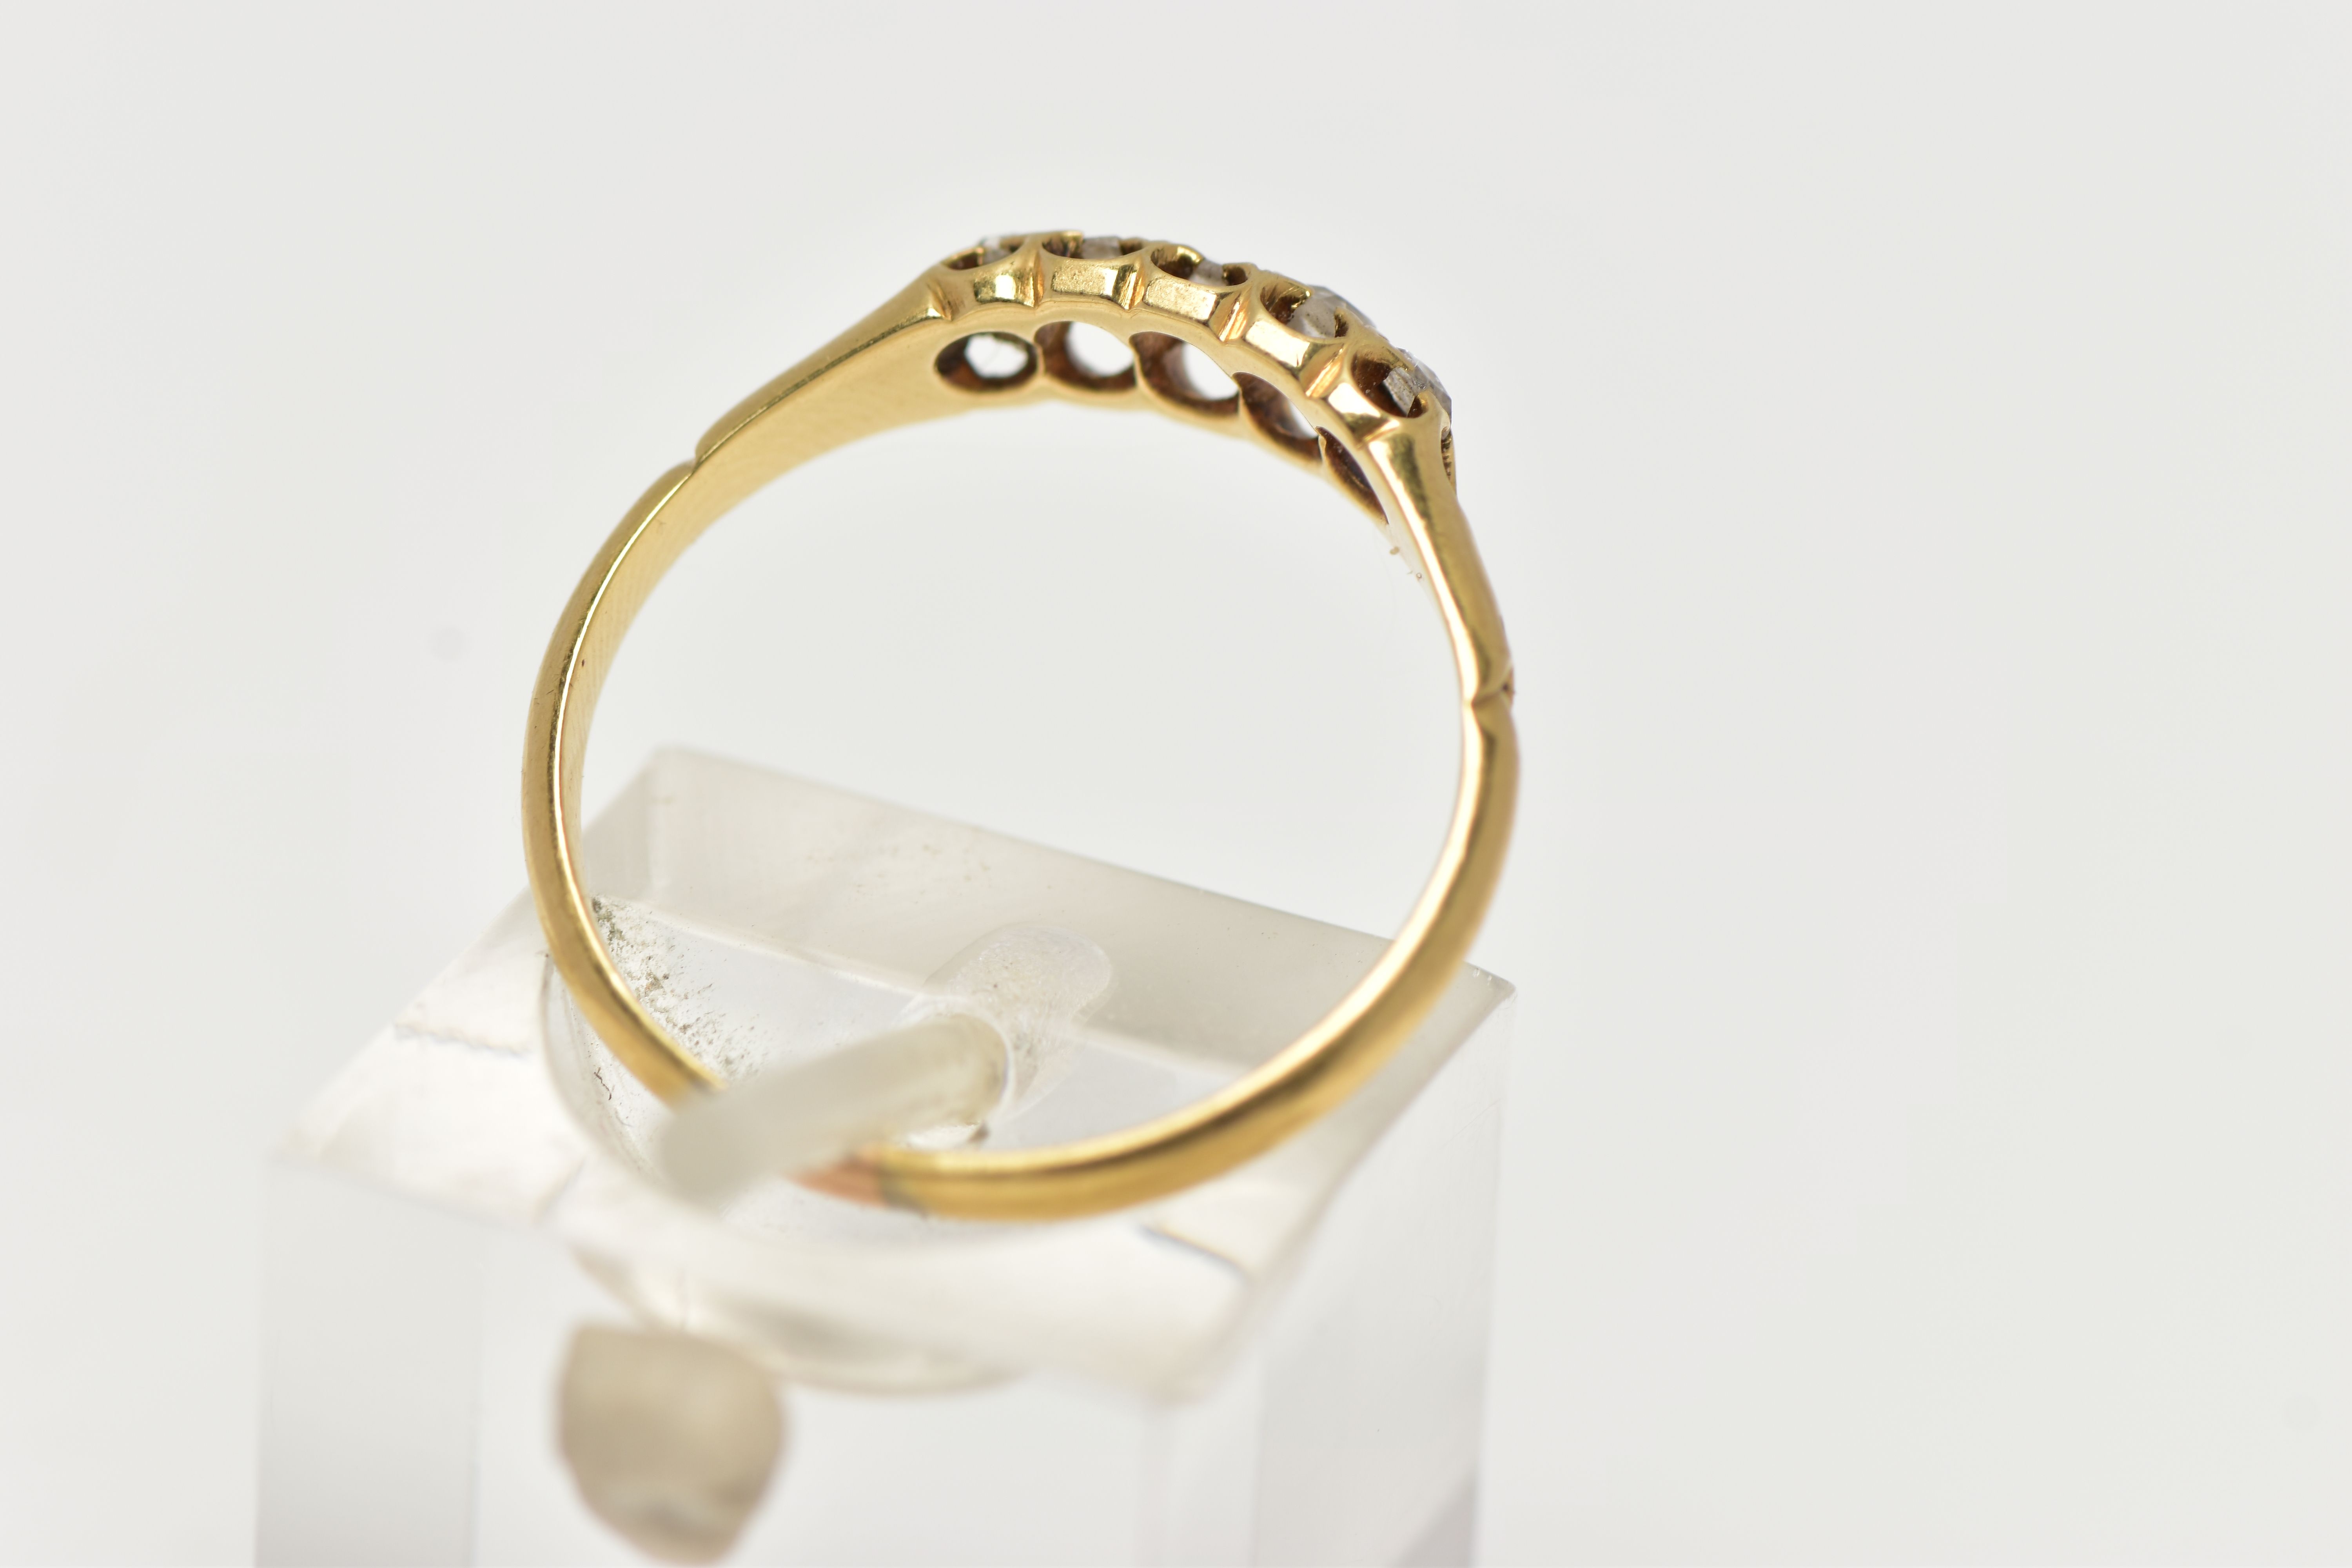 A LATE VICTORIAN 18CT GOLD FIVE STONE DIAMOND RING, designed as a row of five rose cut diamonds, - Image 3 of 4